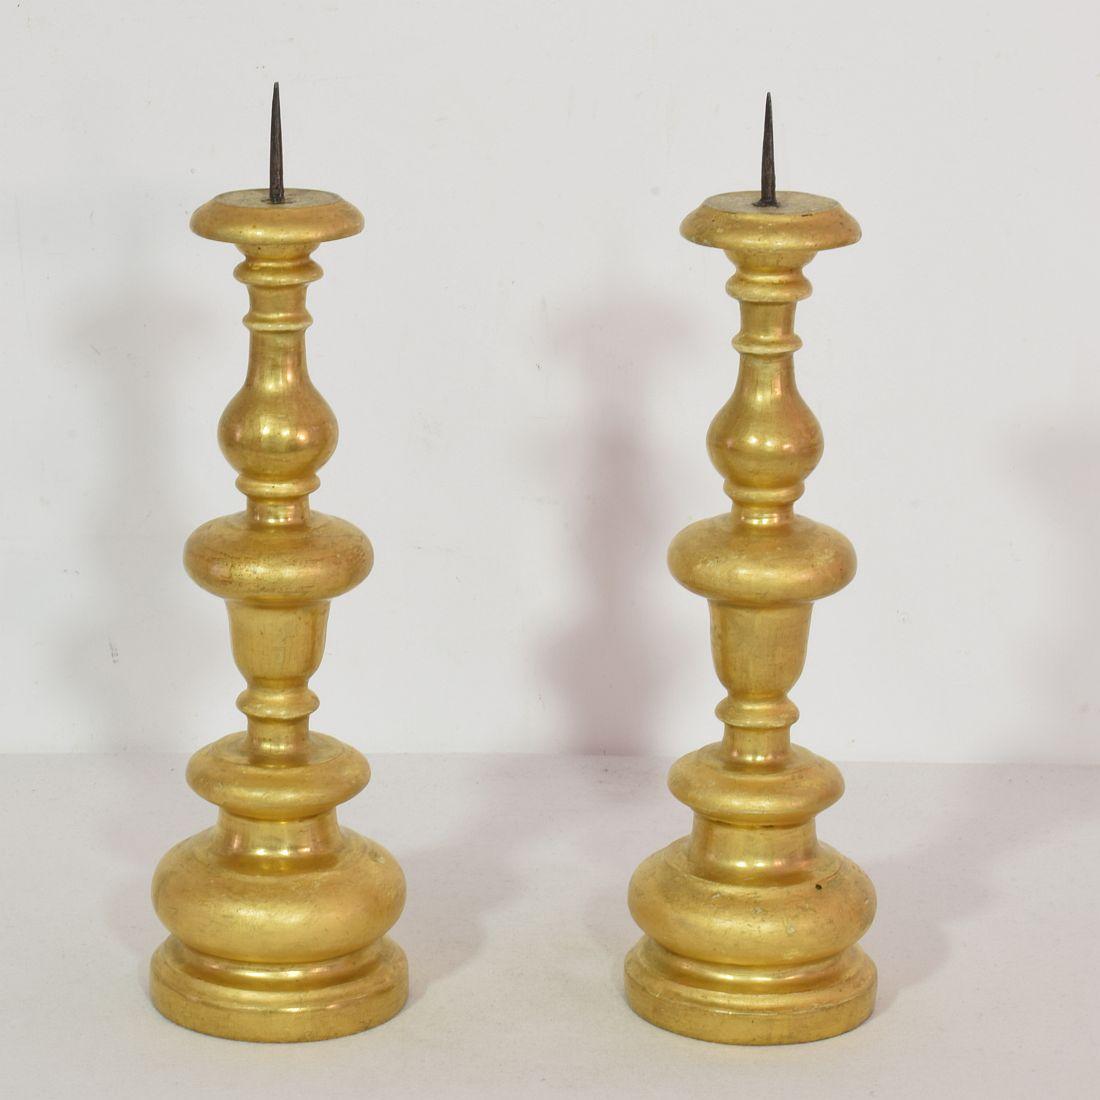 Hand-Crafted Couple of Italian 18th Century Giltwood Baroque Candleholders